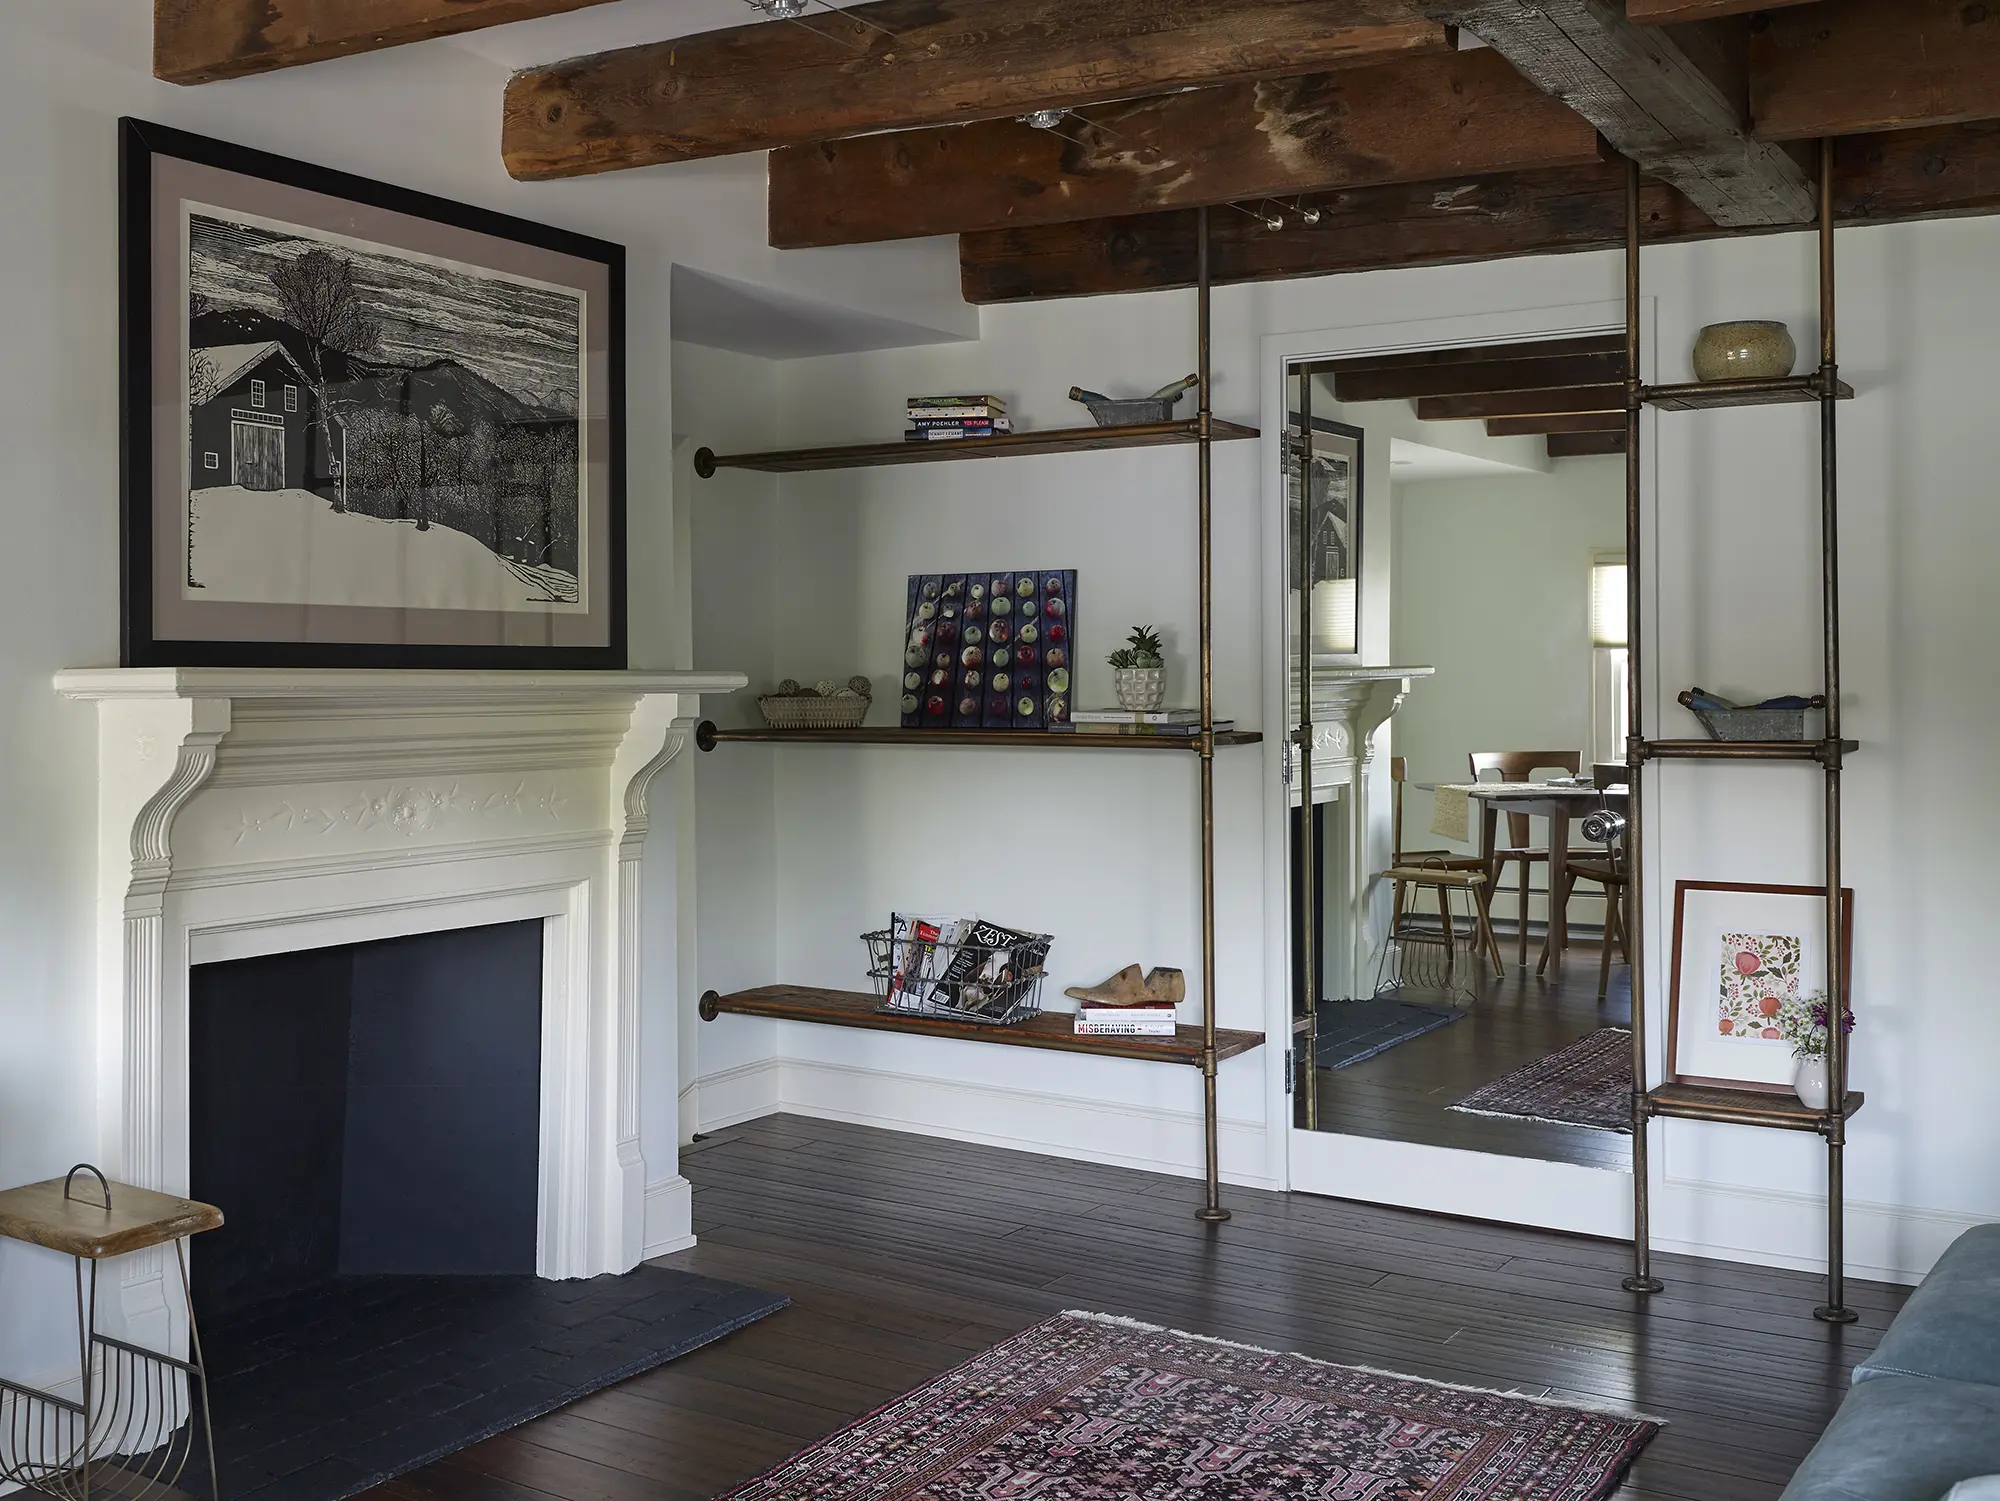 Custom shelving, exposed beams and fireplace